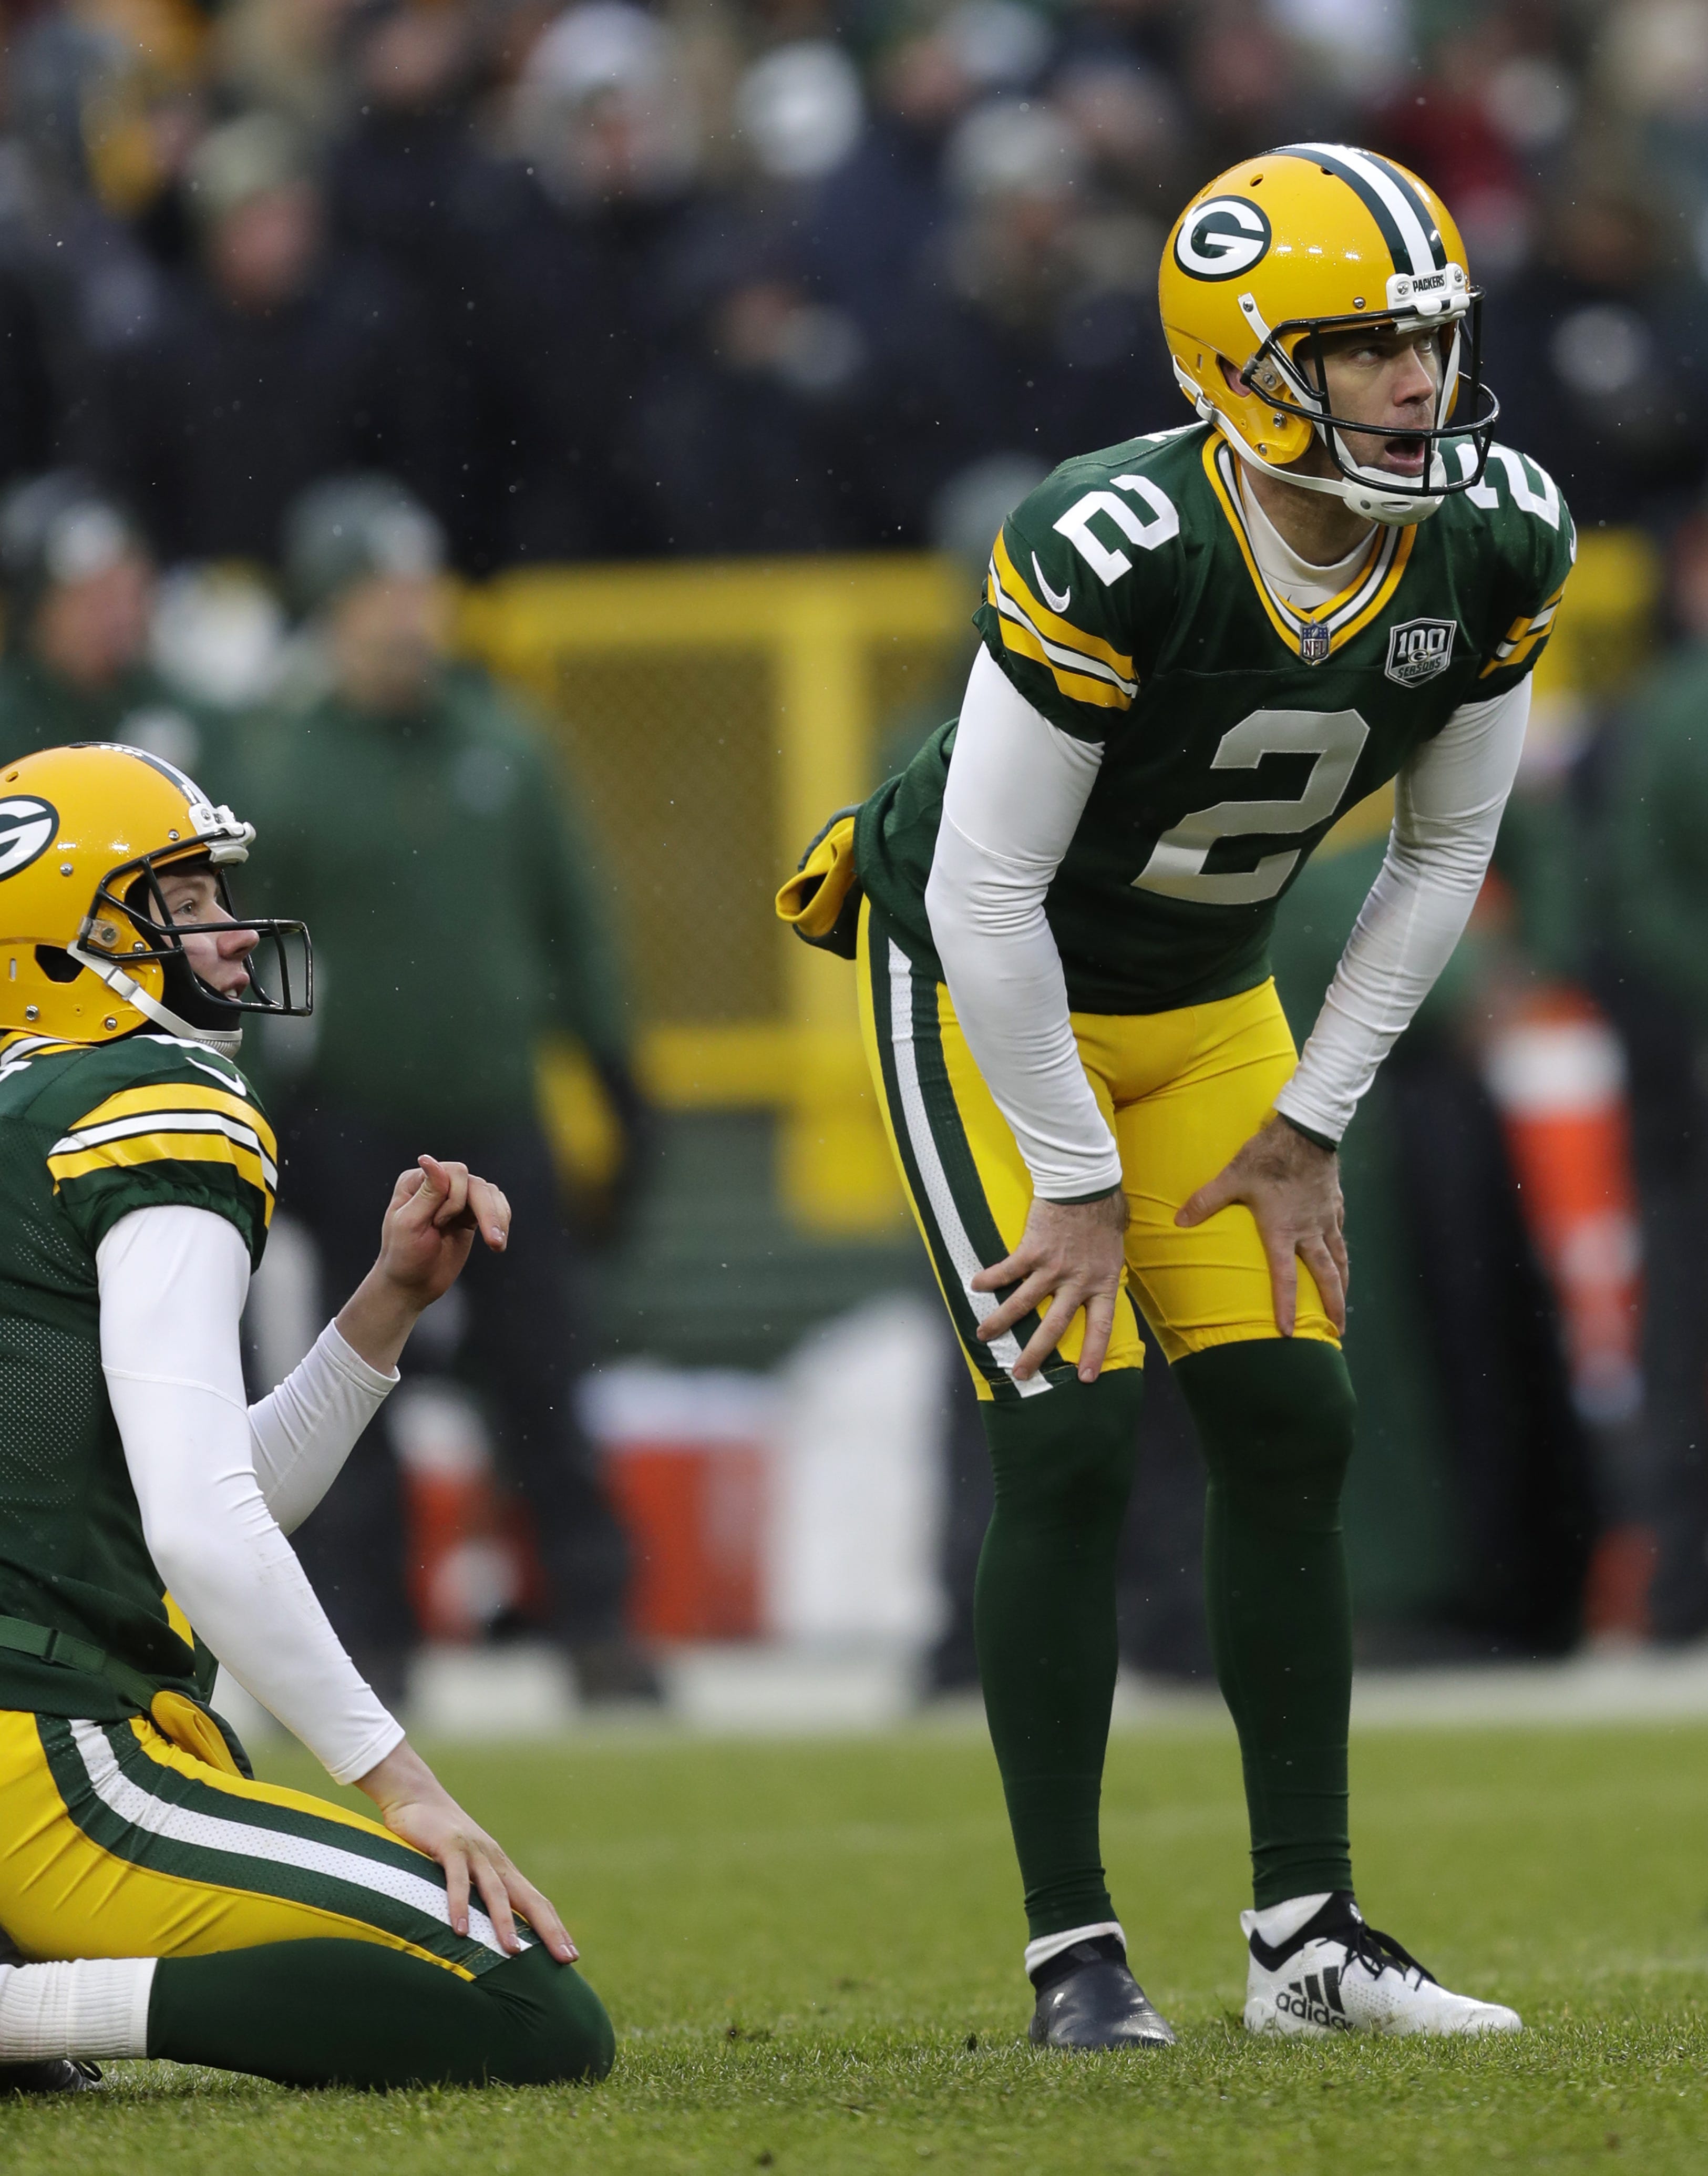 Green Bay Packers kicker Mason Crosby (2) and Green Bay Packers punter J.K. Scott (6) react to a misssing the potential game-tying fieldgoal as time expires against the Arizona Cardinals Sunday, December 2, 2018, at Lambeau Field in Green Bay, Wis. 
Dan Powers/USA TODAY NETWORK-Wisconsin
Sunday, December 2, 2018, at Lambeau Field in Green Bay, Wis. 
Dan Powers/USA TODAY NETWORK-Wisconsin